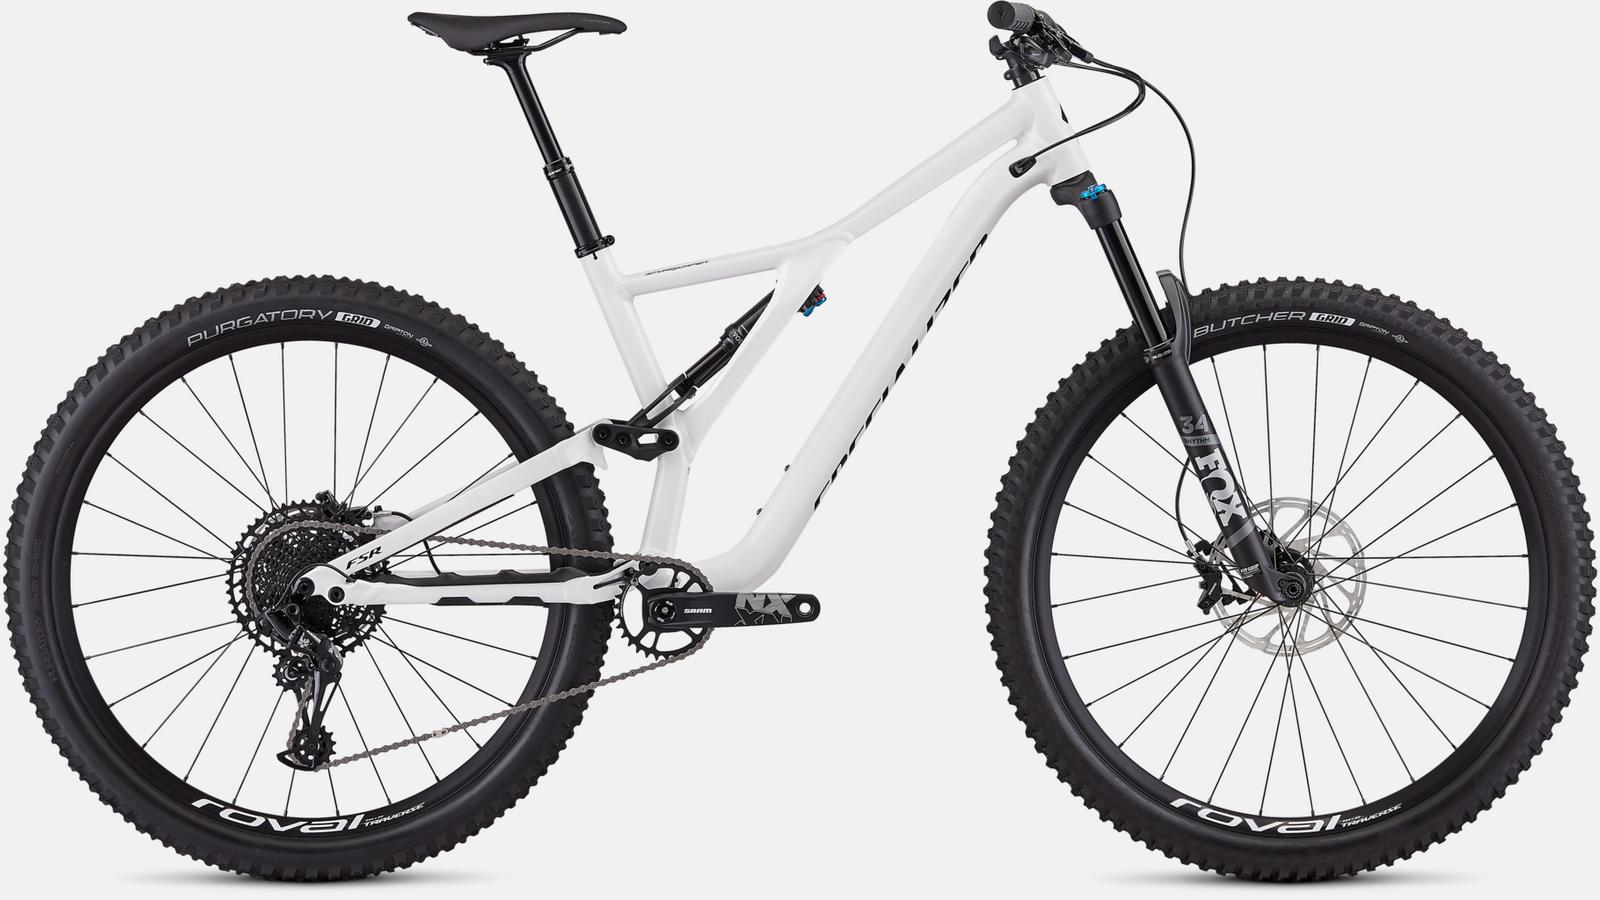 Paint for 2019 Specialized Men's Stumpjumper Comp Alloy 29 - 12-speed - Gloss White